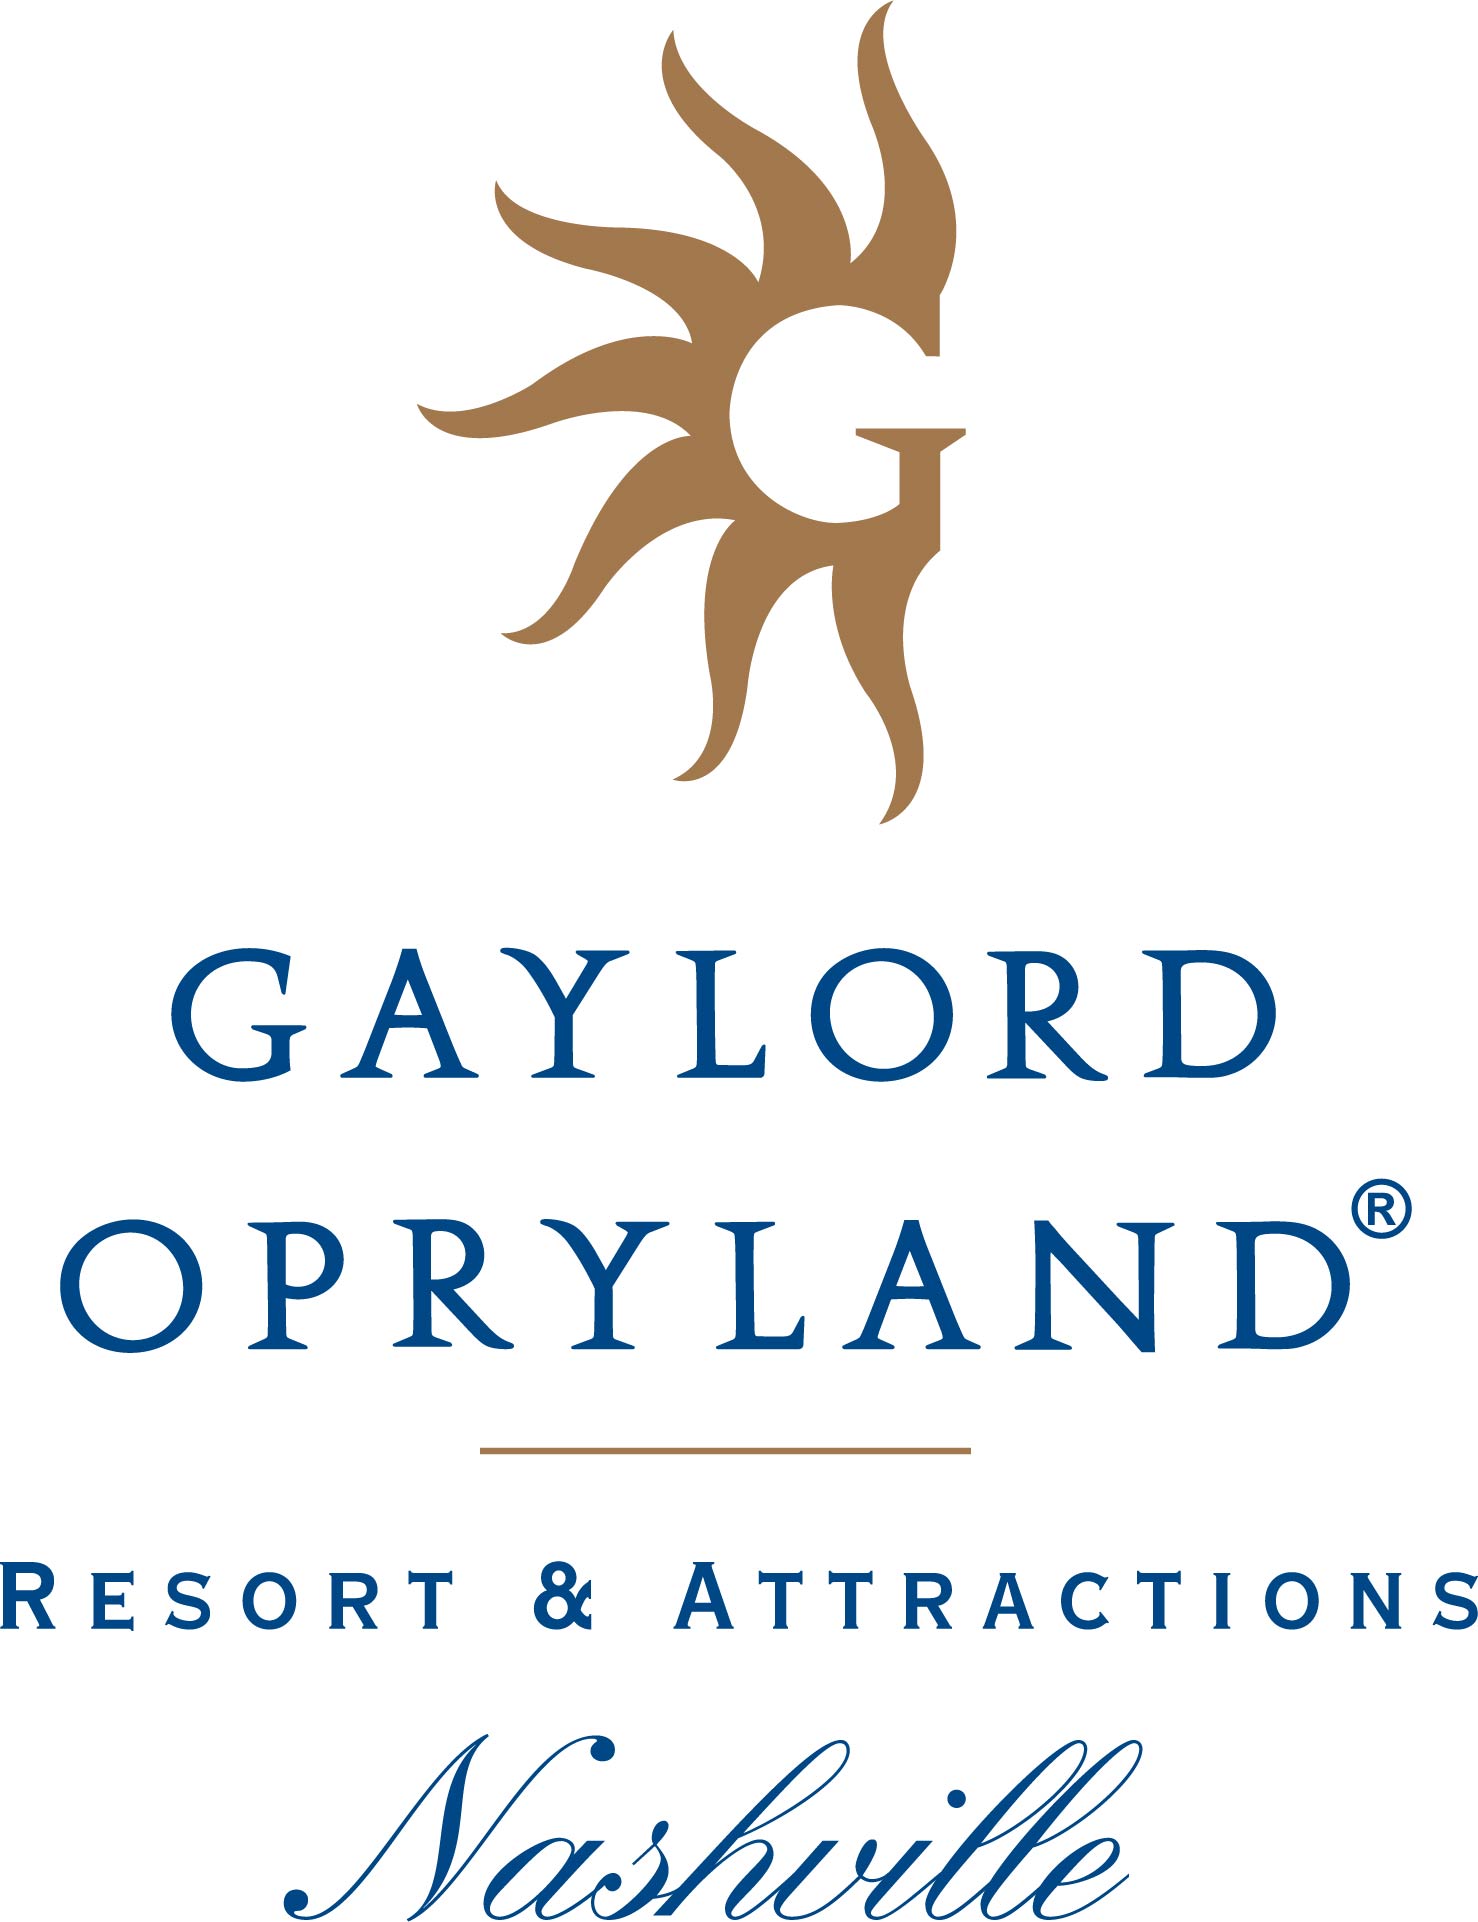  Gaylord Opryland Resorts and Attractions Nashville Logo